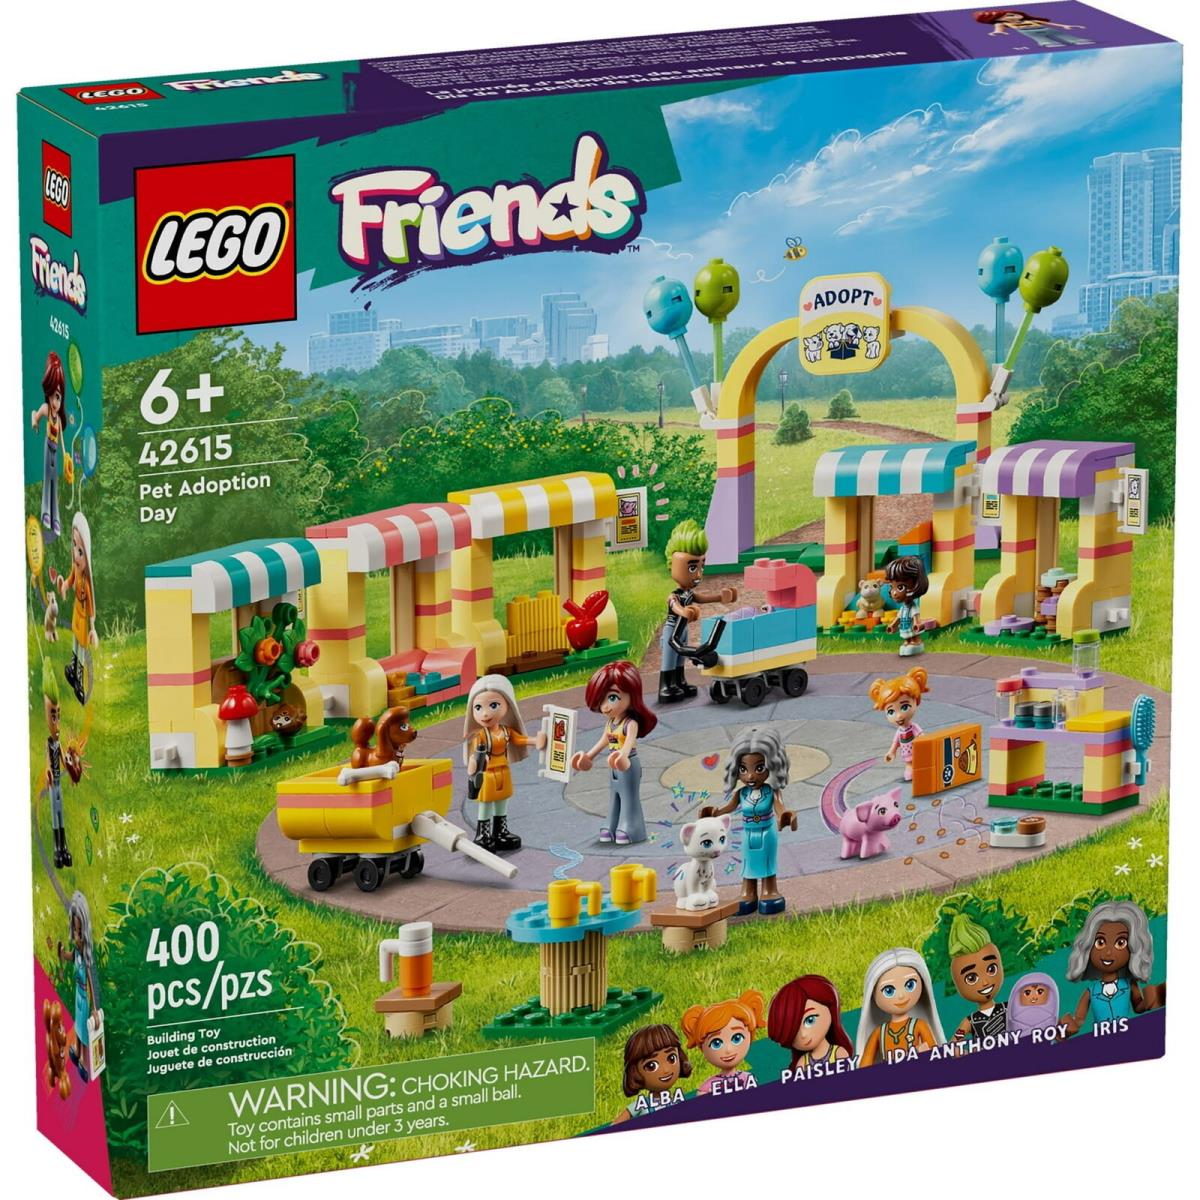 Lego Friends Pet Adoption Day 42615 Building Toy Set Gift